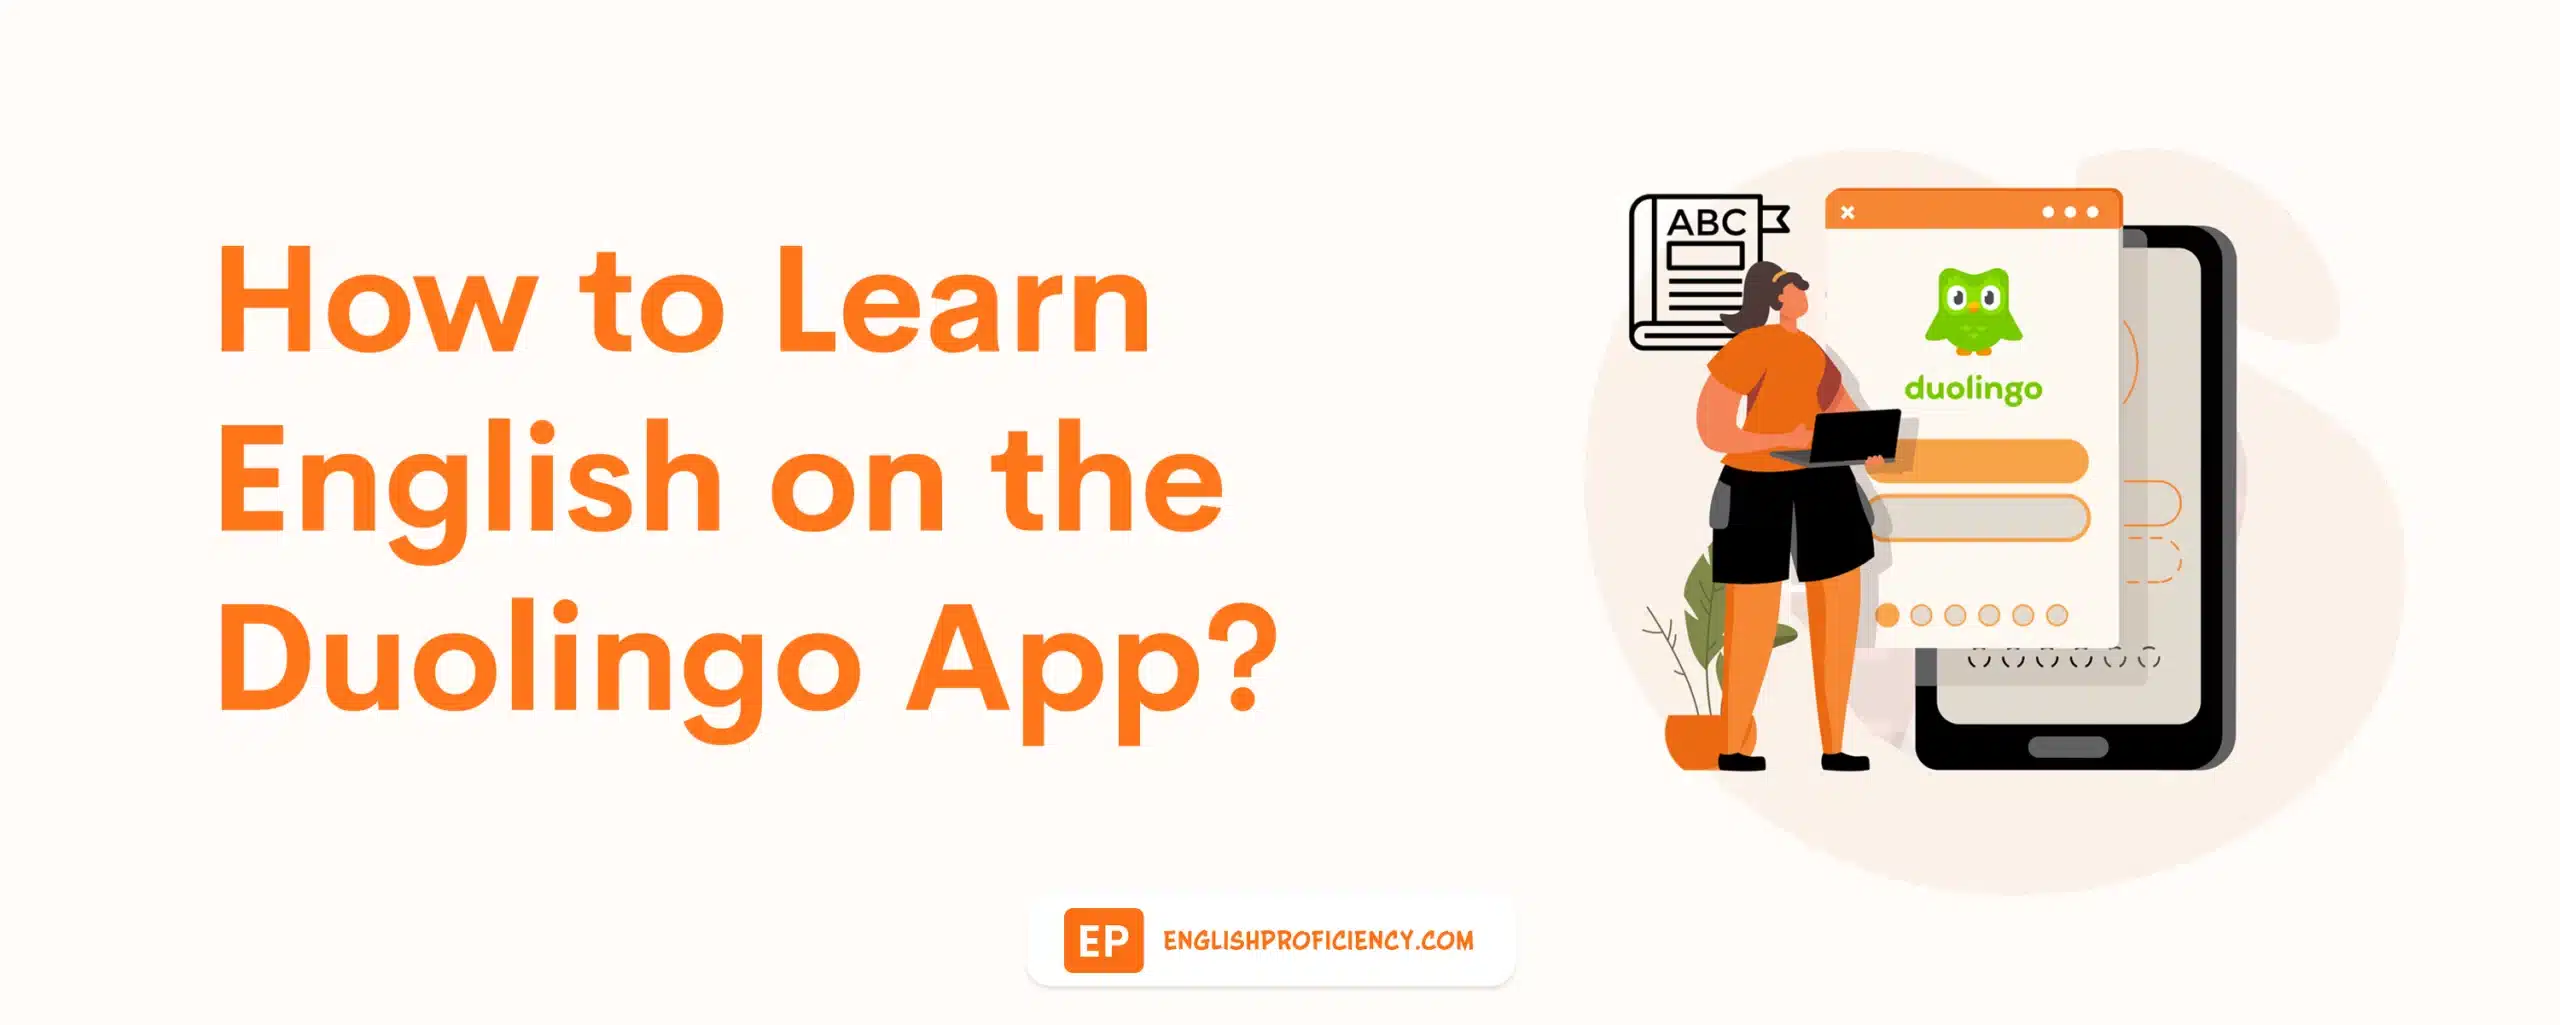 How to Learn English on the Duolingo App